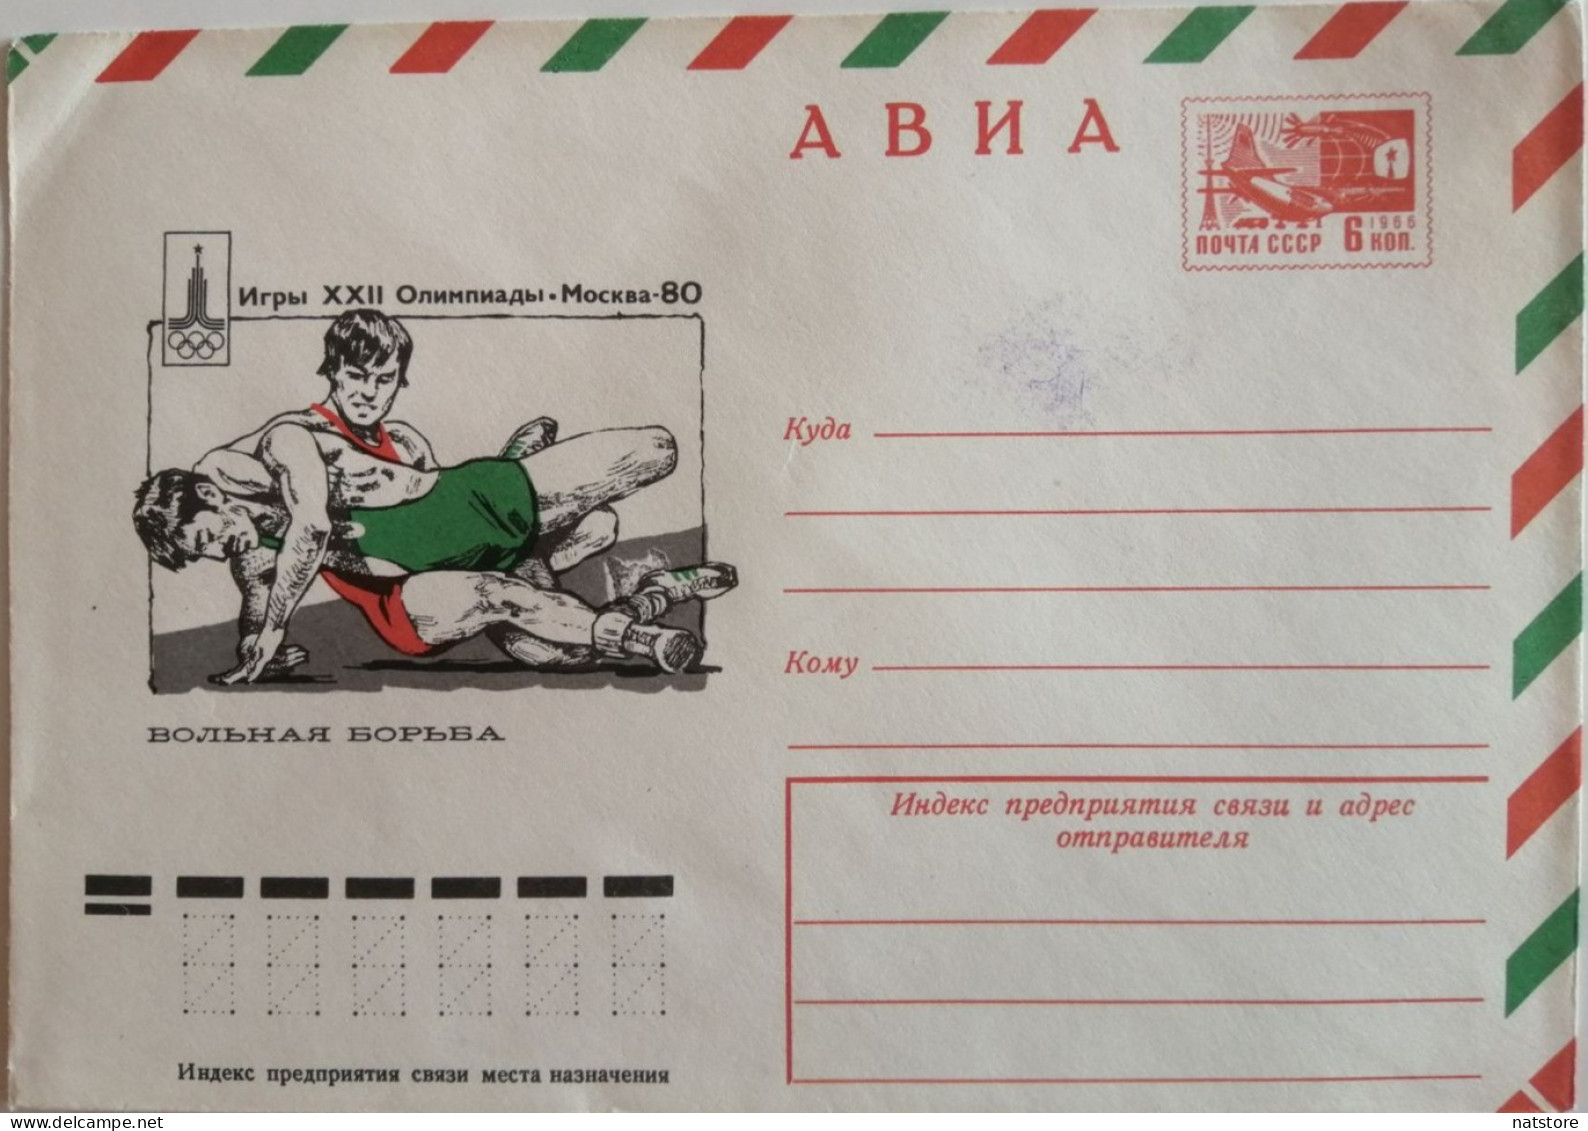 1977..USSR...VINTAGE  COVER WITH STAMP..AVIA ..OLYMPIC GAMES XXII..MOSCOW-80..FREESTYLE WRESTLING - Verano 1980: Moscu